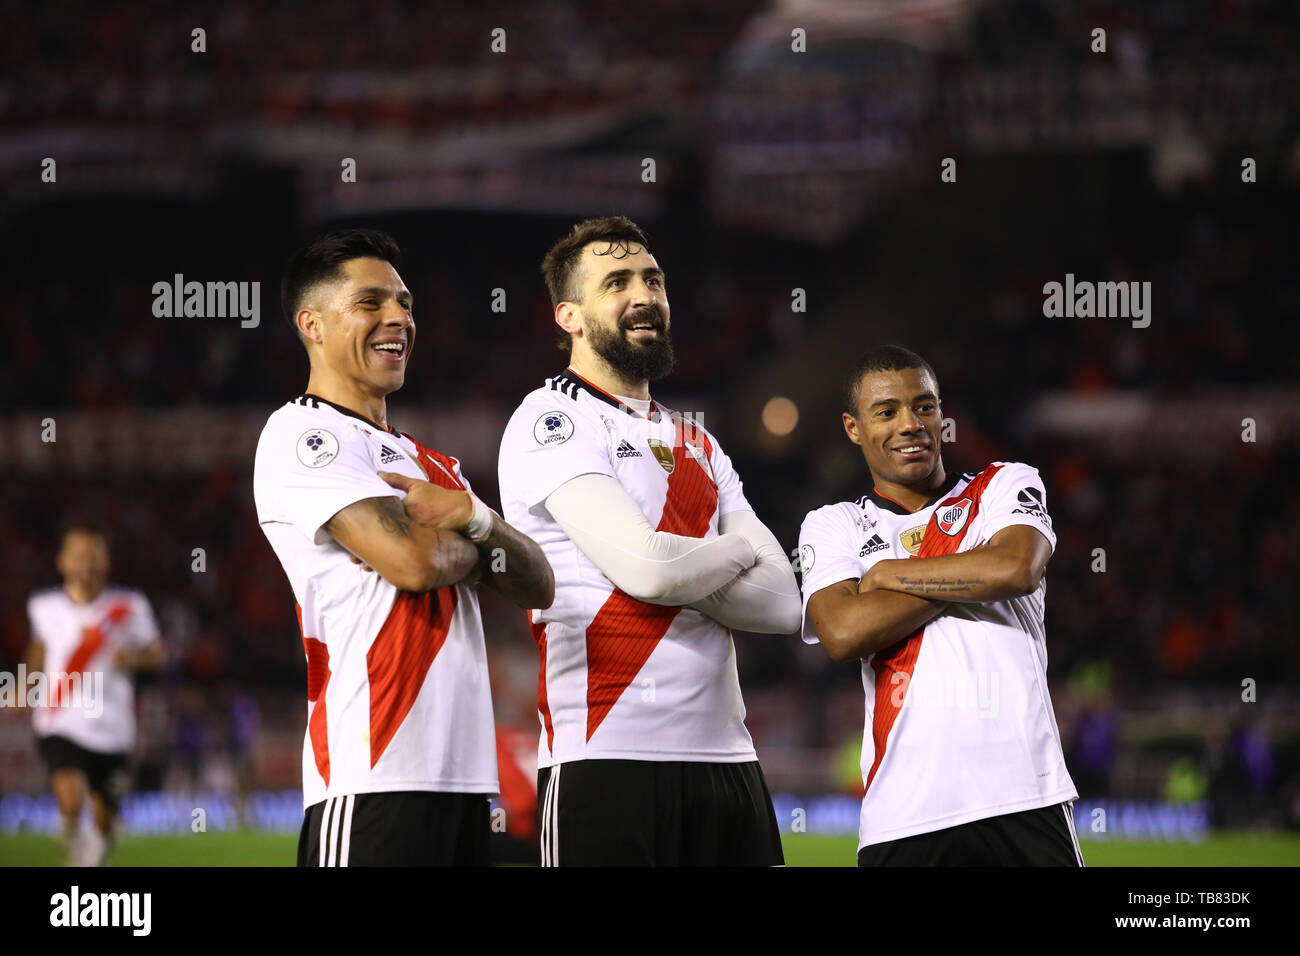 Buenos Aires, Argentina - May 30, 2019: Lucas Pratto, Enzo Perez and Matias Suarez posing and celebrating the winning goal of Pratto of the Conmebol R Stock Photo